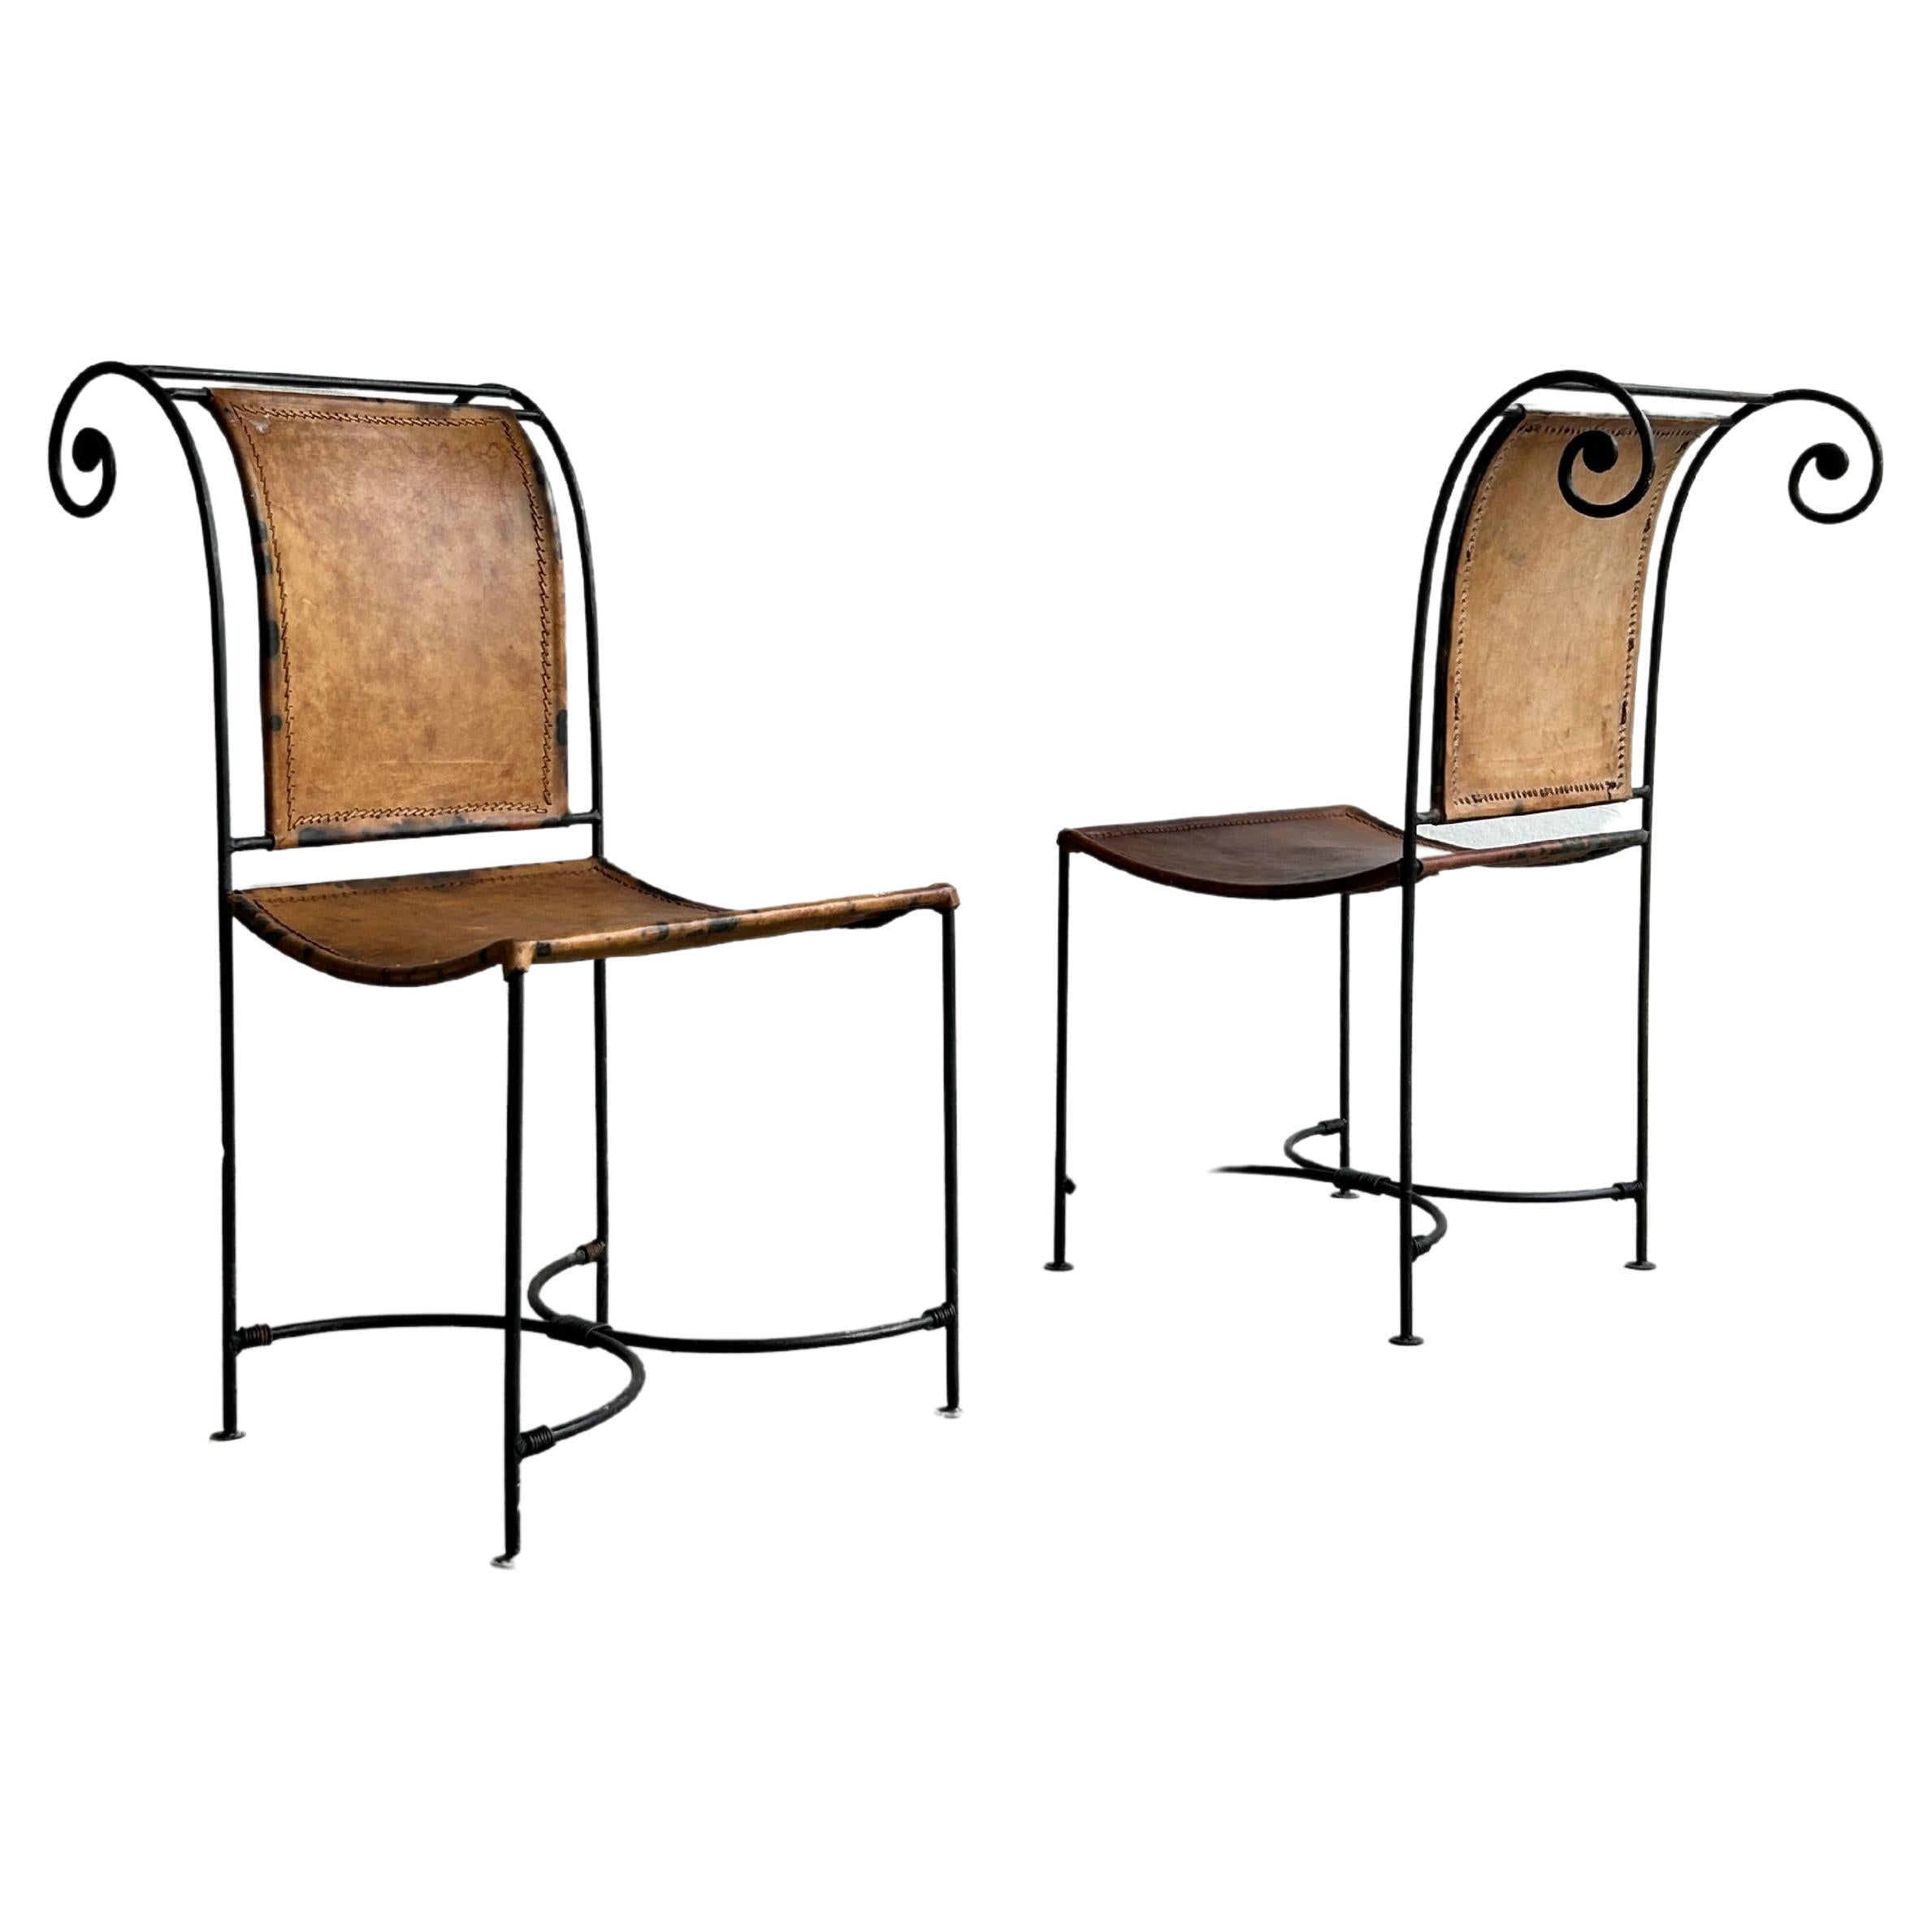 Vintage Sculptural Wrought Iron and Leather Handcrafted Accent Chairs